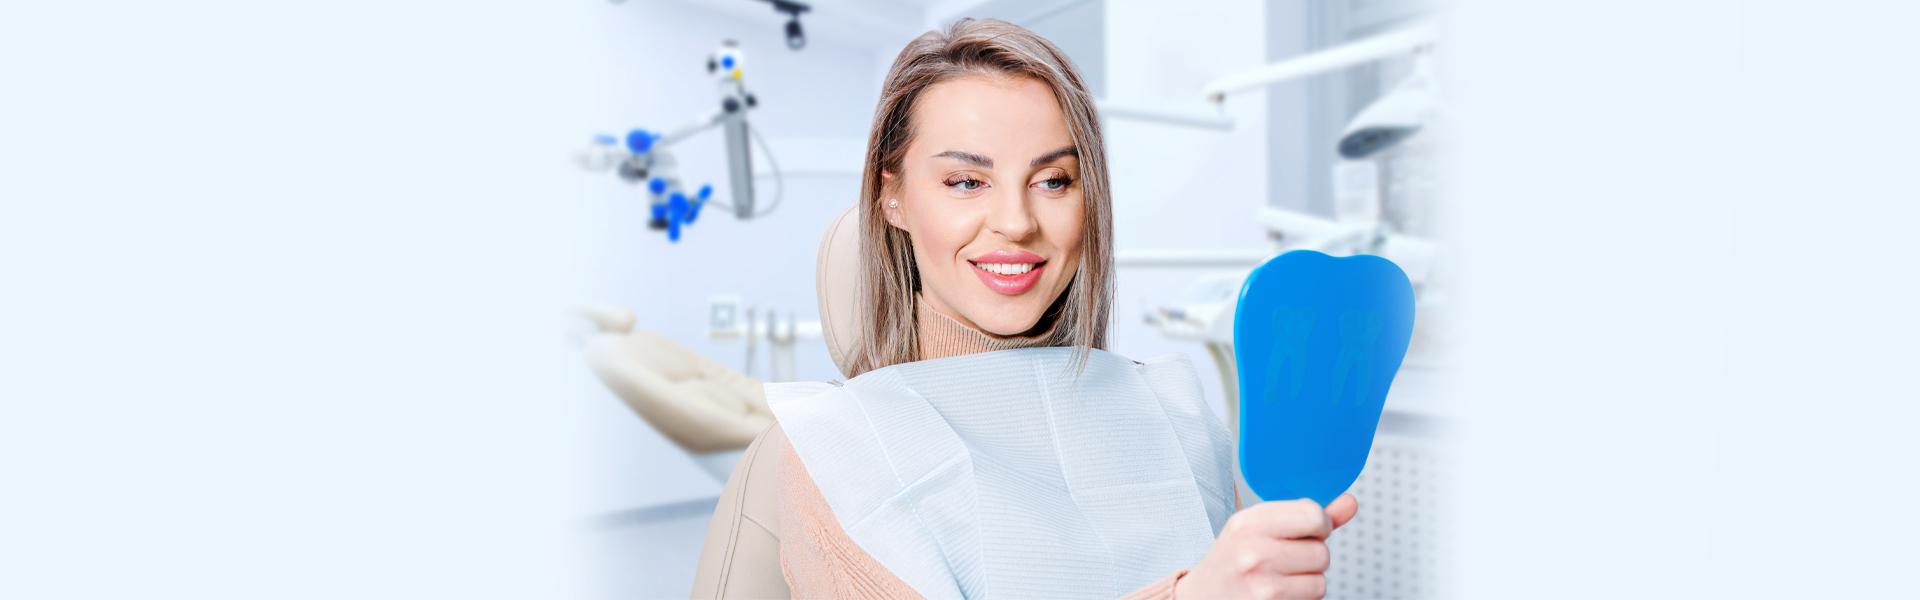 Facts You Should Know About Routine Dental Exams